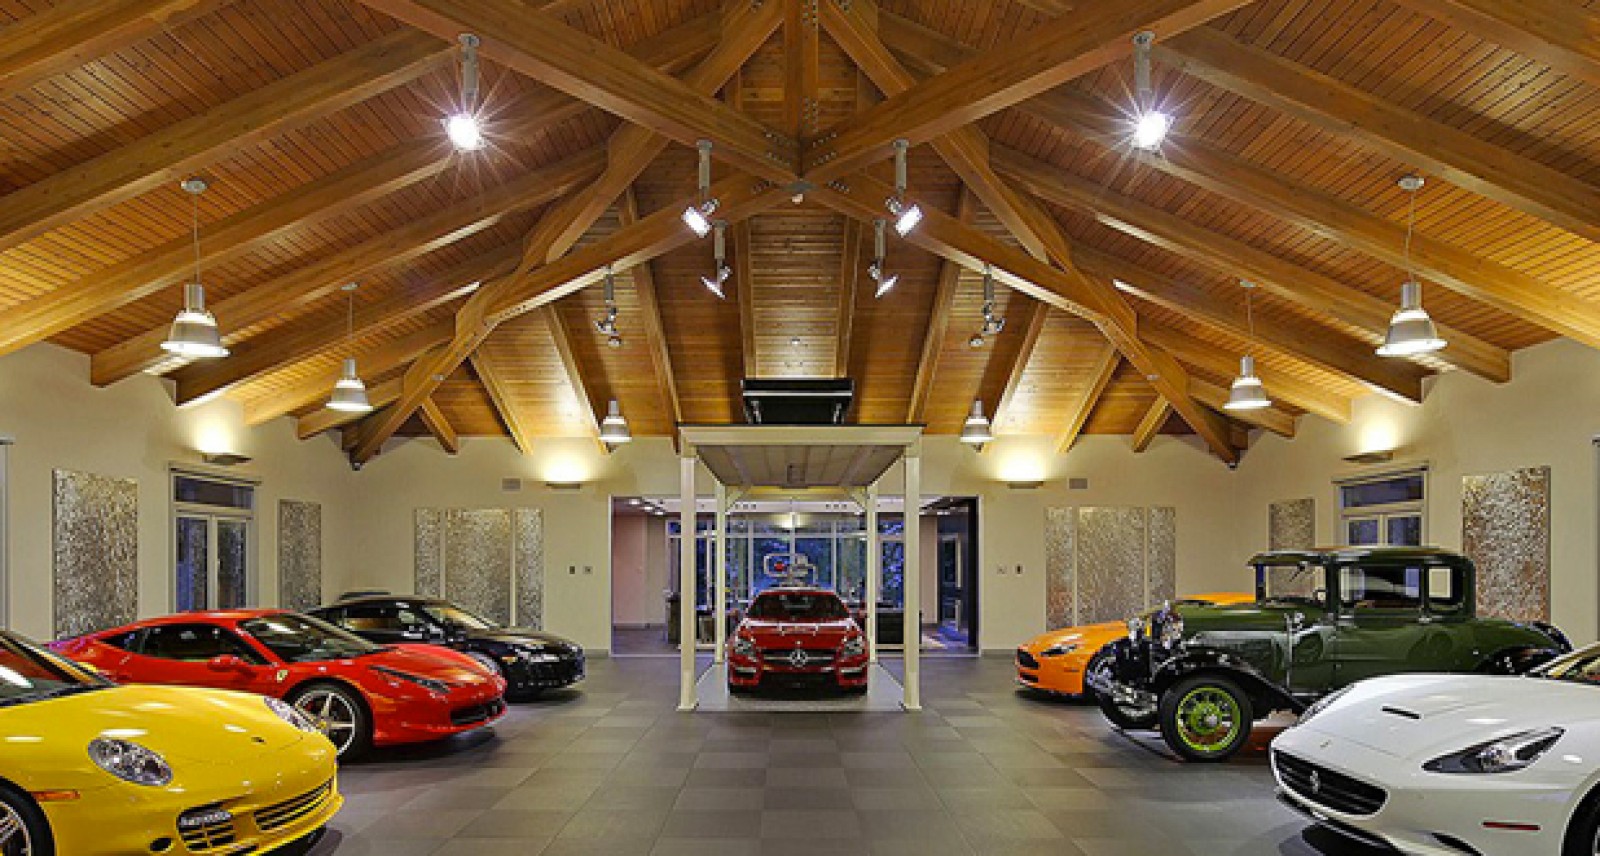 Daily 5: The exotic car garage of your dreams, plus the rest of today’s